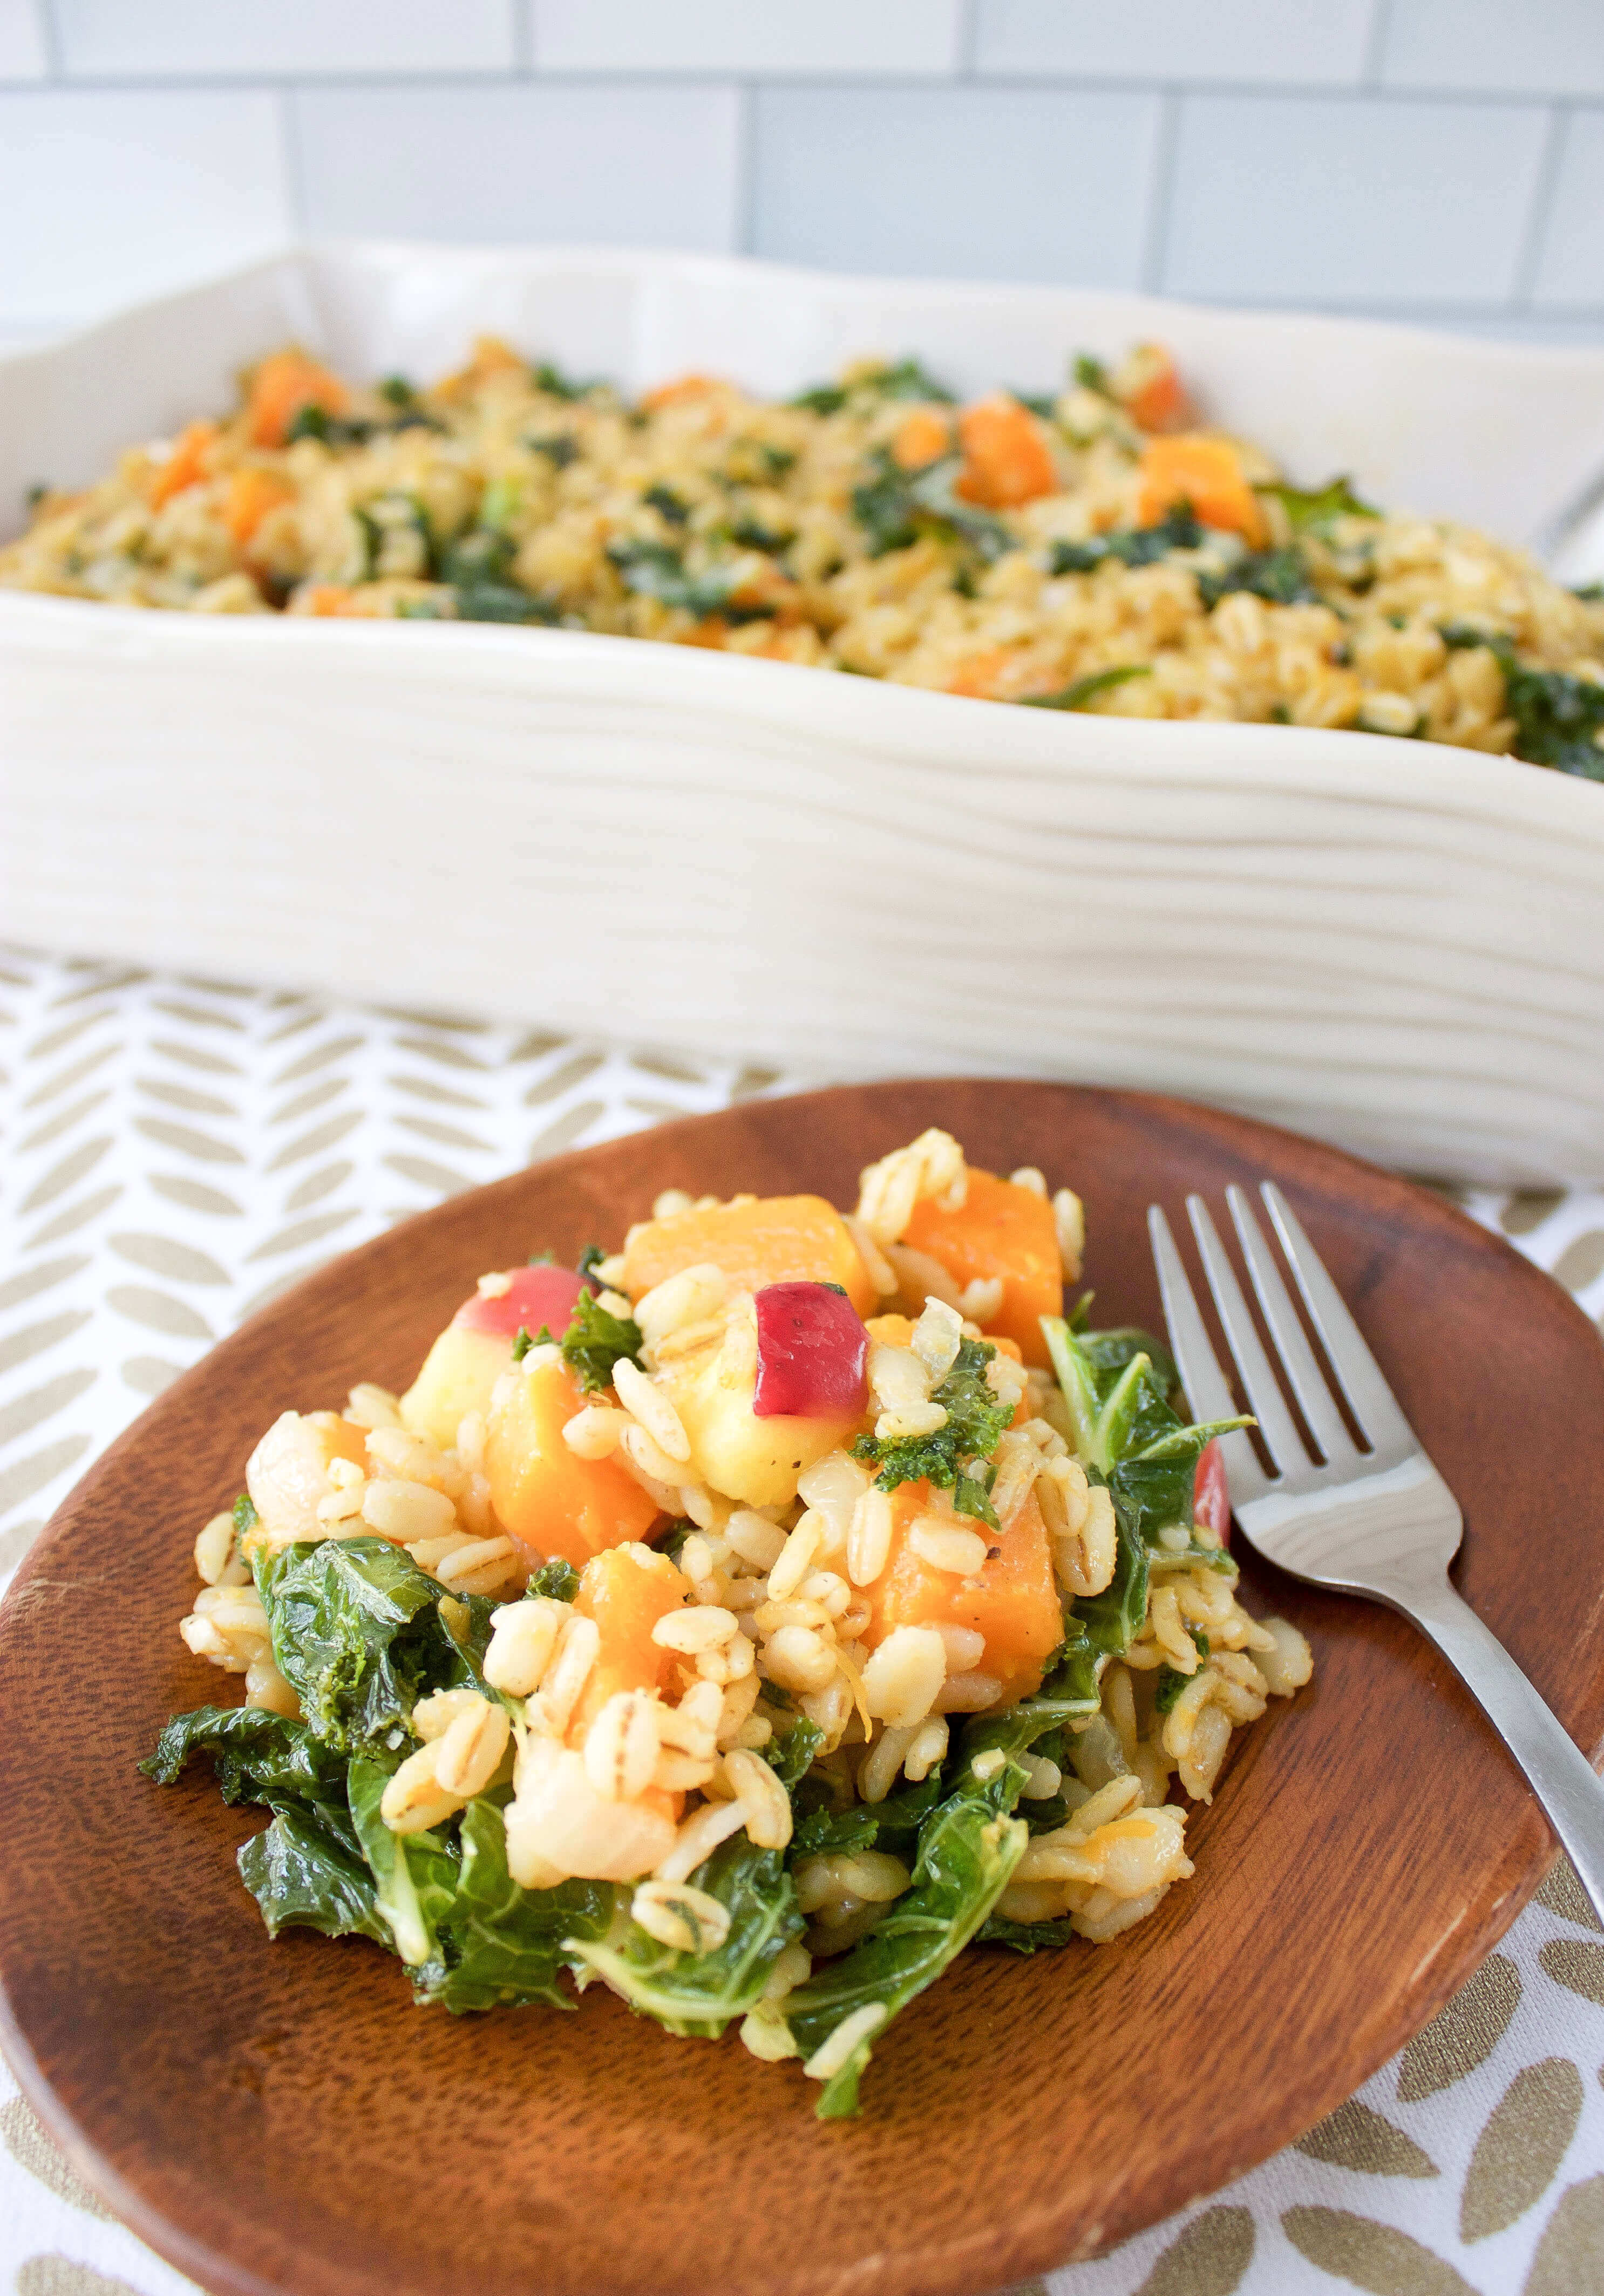 Barley Stuffing with Butternut Squash, Apples, and Kale 